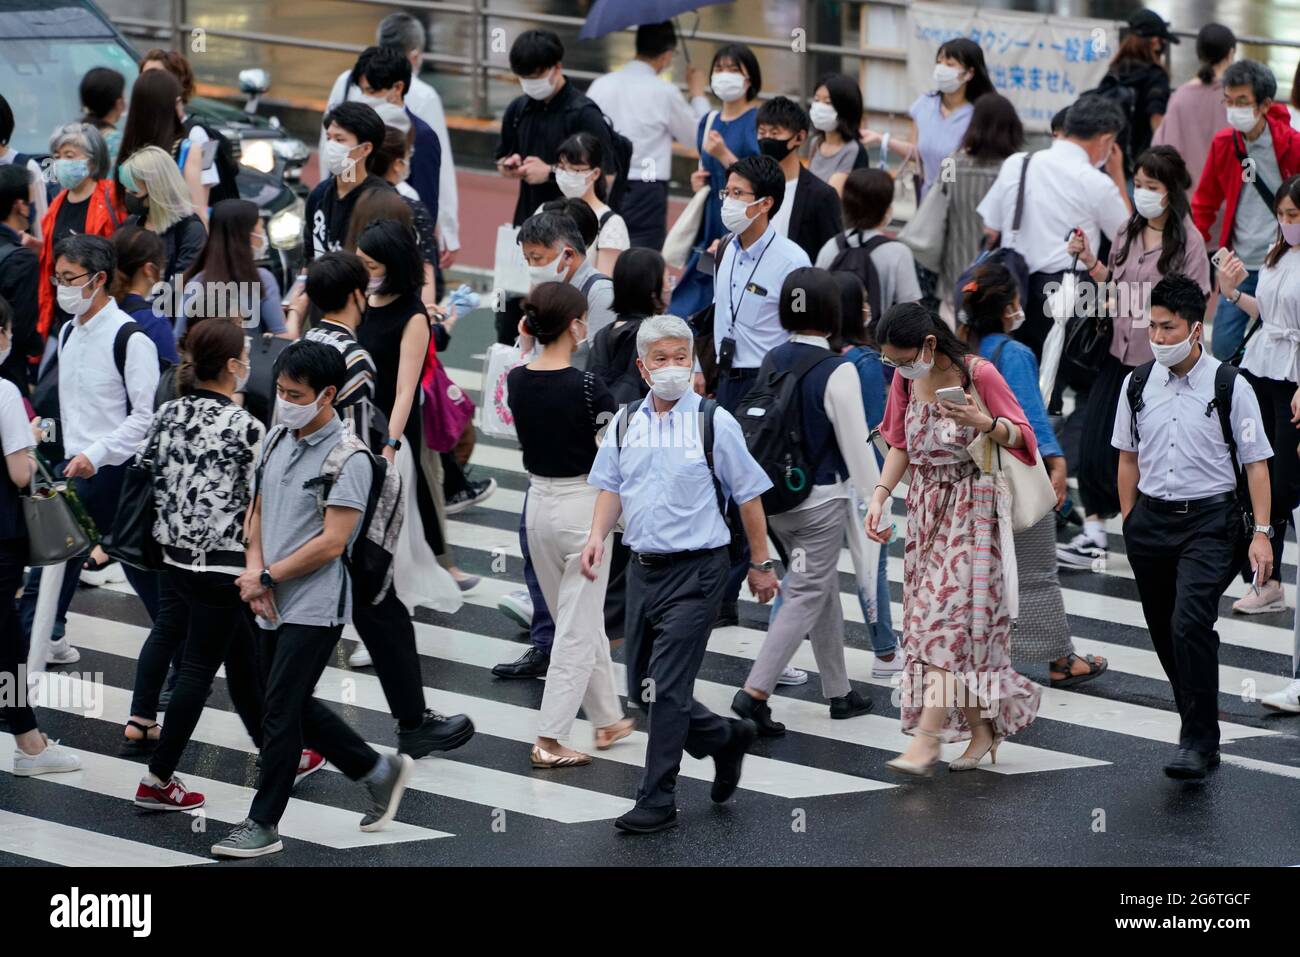 Tokyo. 8th July, 2021. Pedestrians walk across a street in Tokyo, Japan on July 8, 2021. The Japanese government decided Thursday to put capital Tokyo under the fourth state of emergency over COVID-19, covering the duration of the Olympics, in an effort to curb a recent surge in infections. Credit: Christopher Jue/Xinhua/Alamy Live News Stock Photo